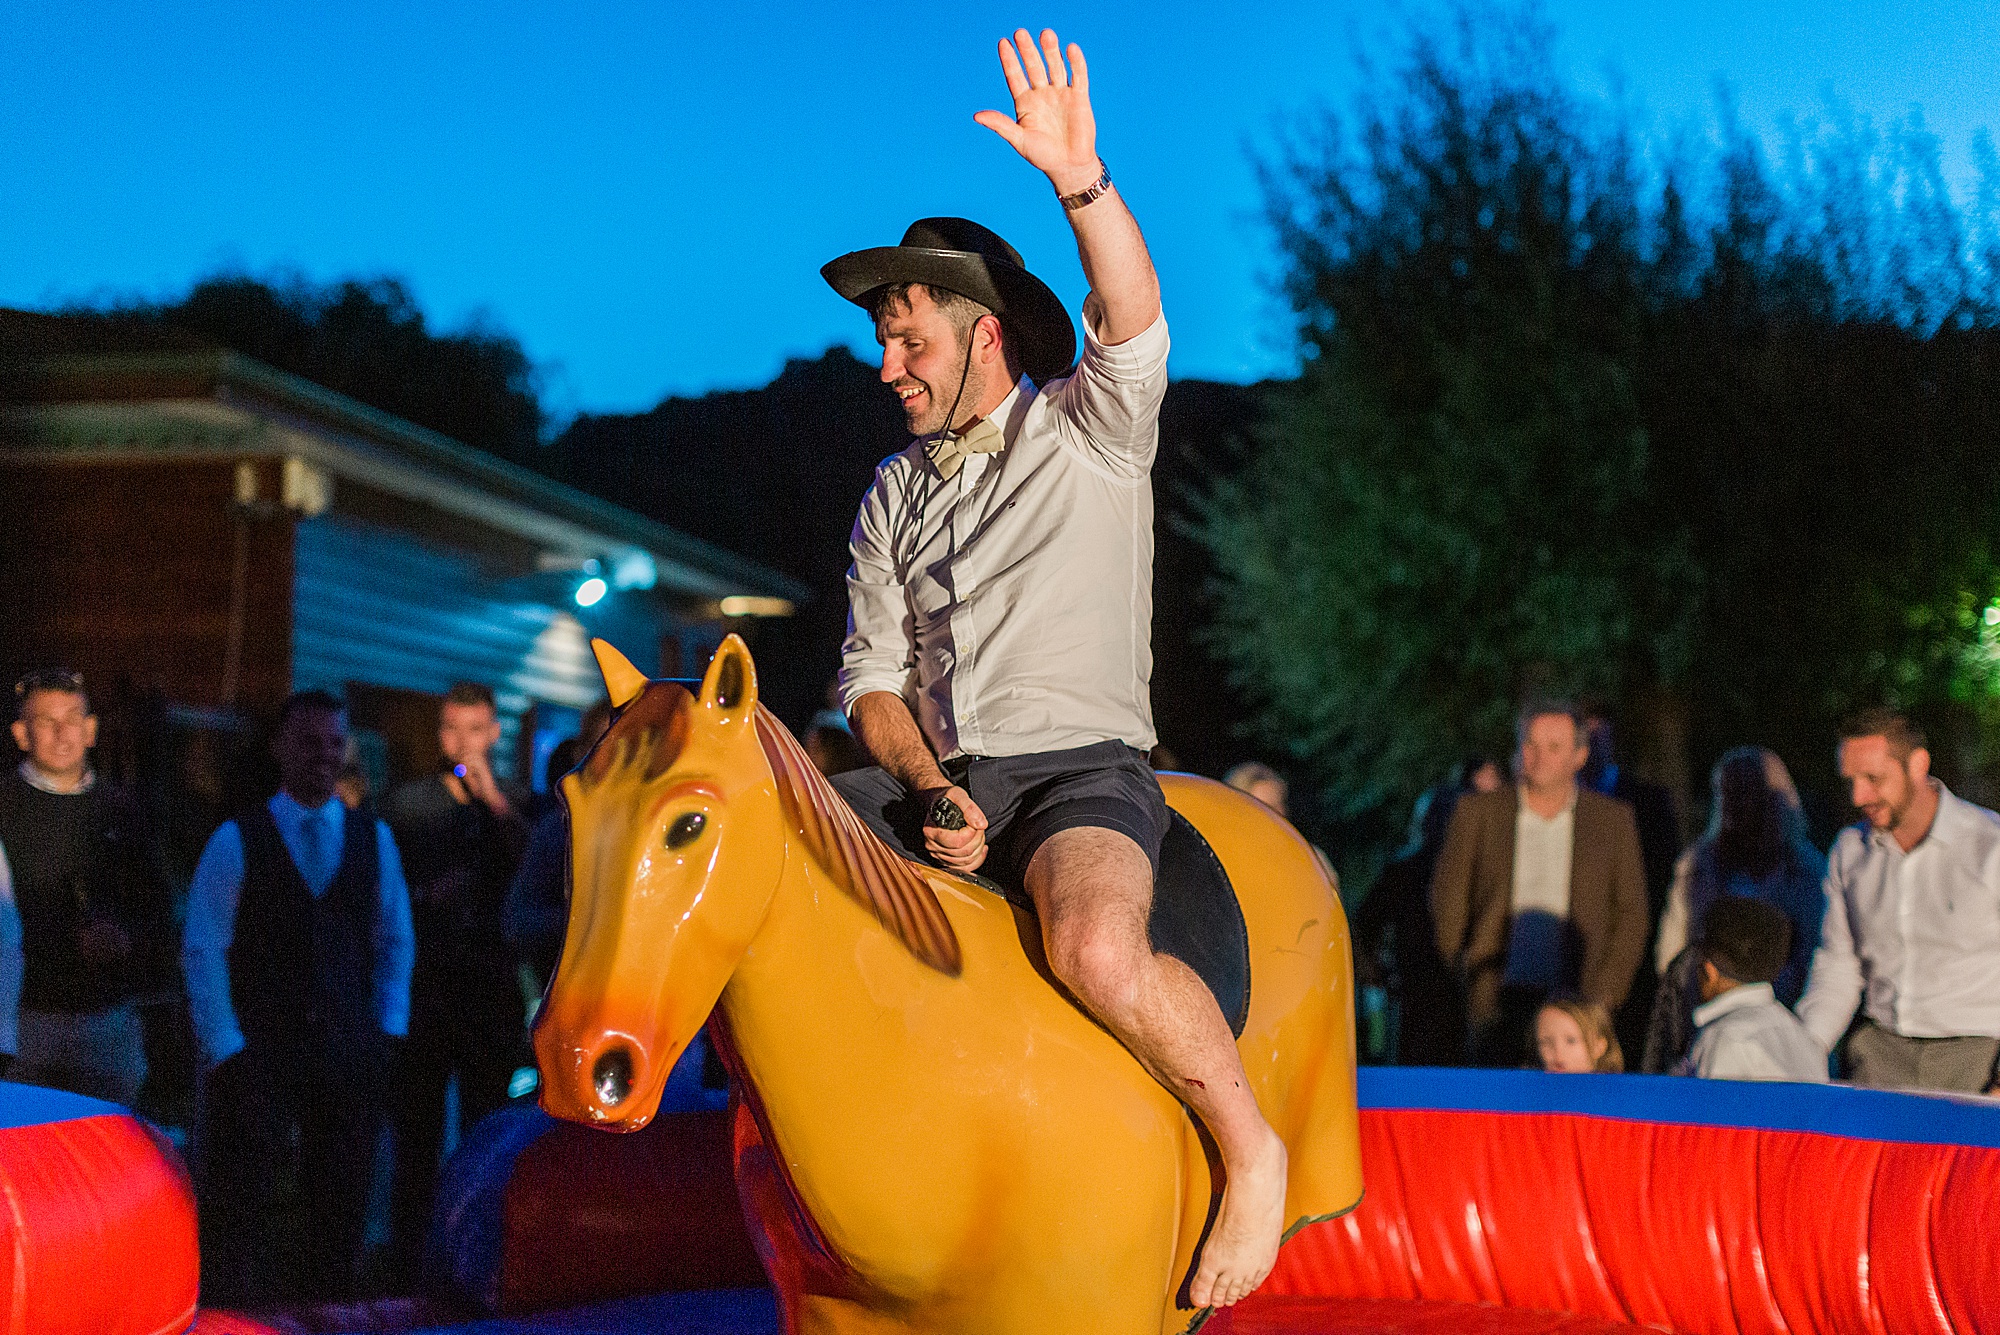 photo of a groom riding a mechanical rodeo pony outside at a wedding reception with guests watching. he is wearing a cowboy hat and has one hand waving up in the air 